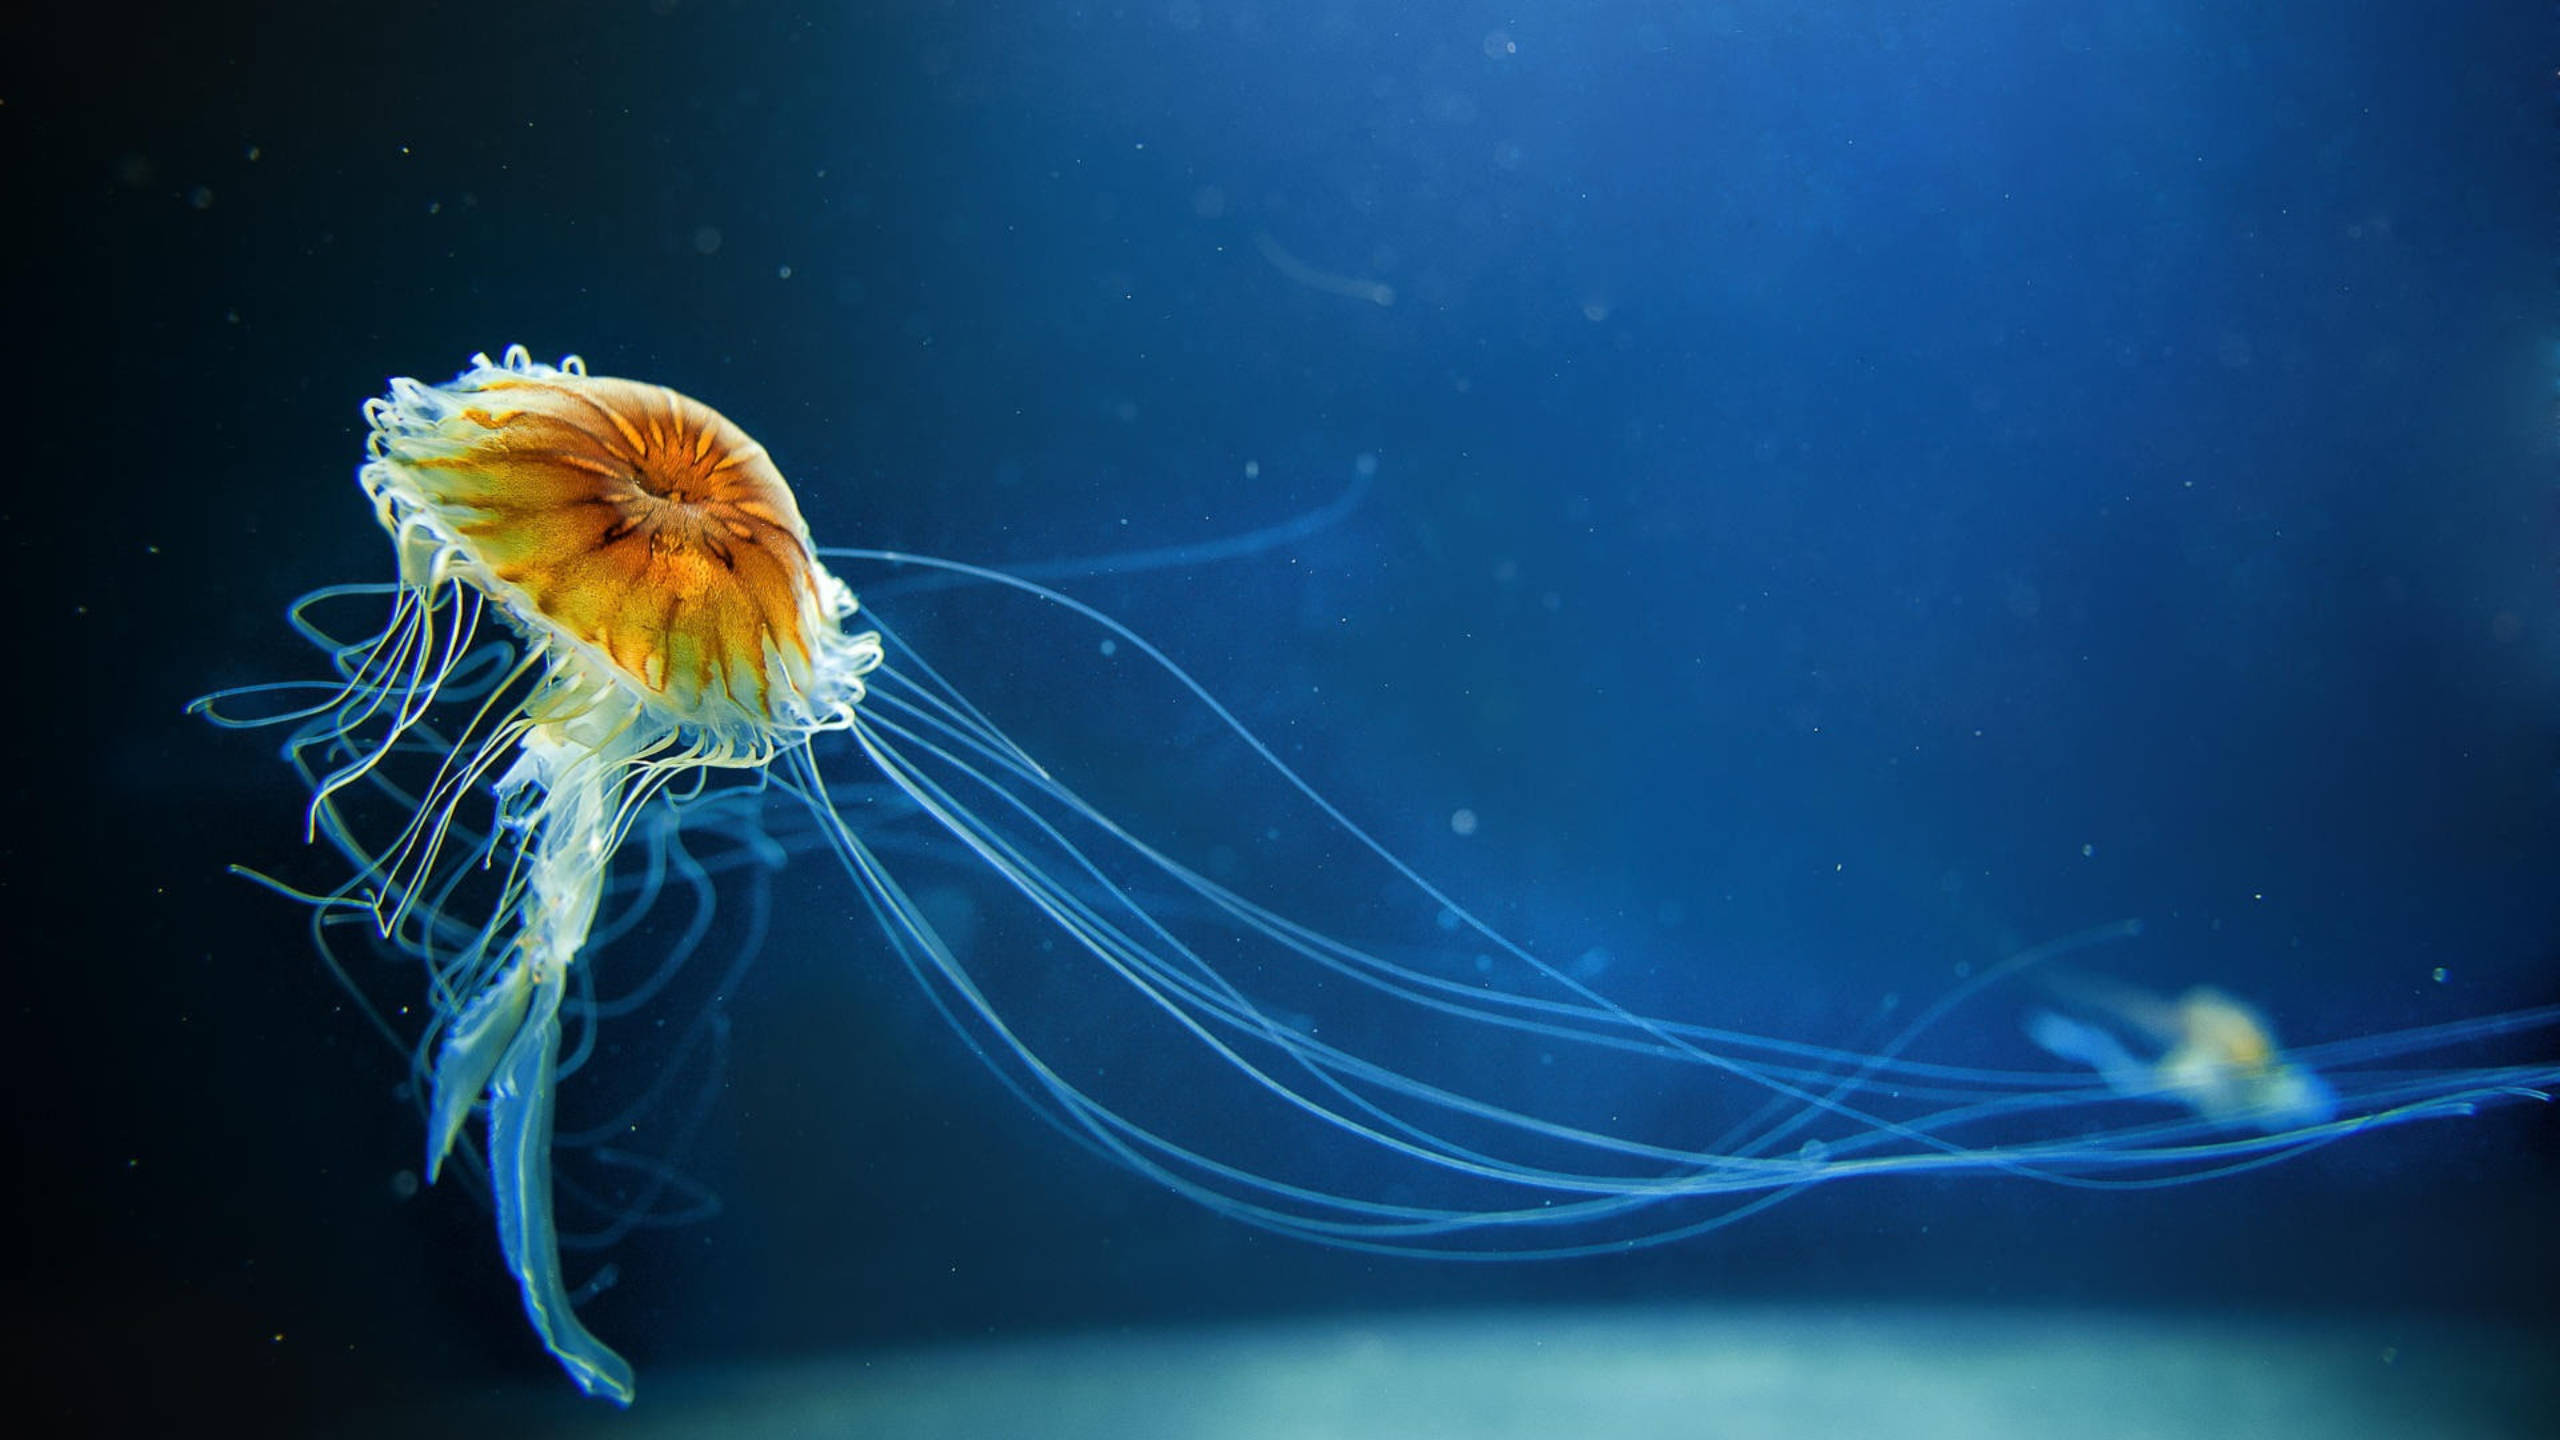 Free Jellyfish Wallpaper Downloads, [100+] Jellyfish Wallpapers for FREE |  